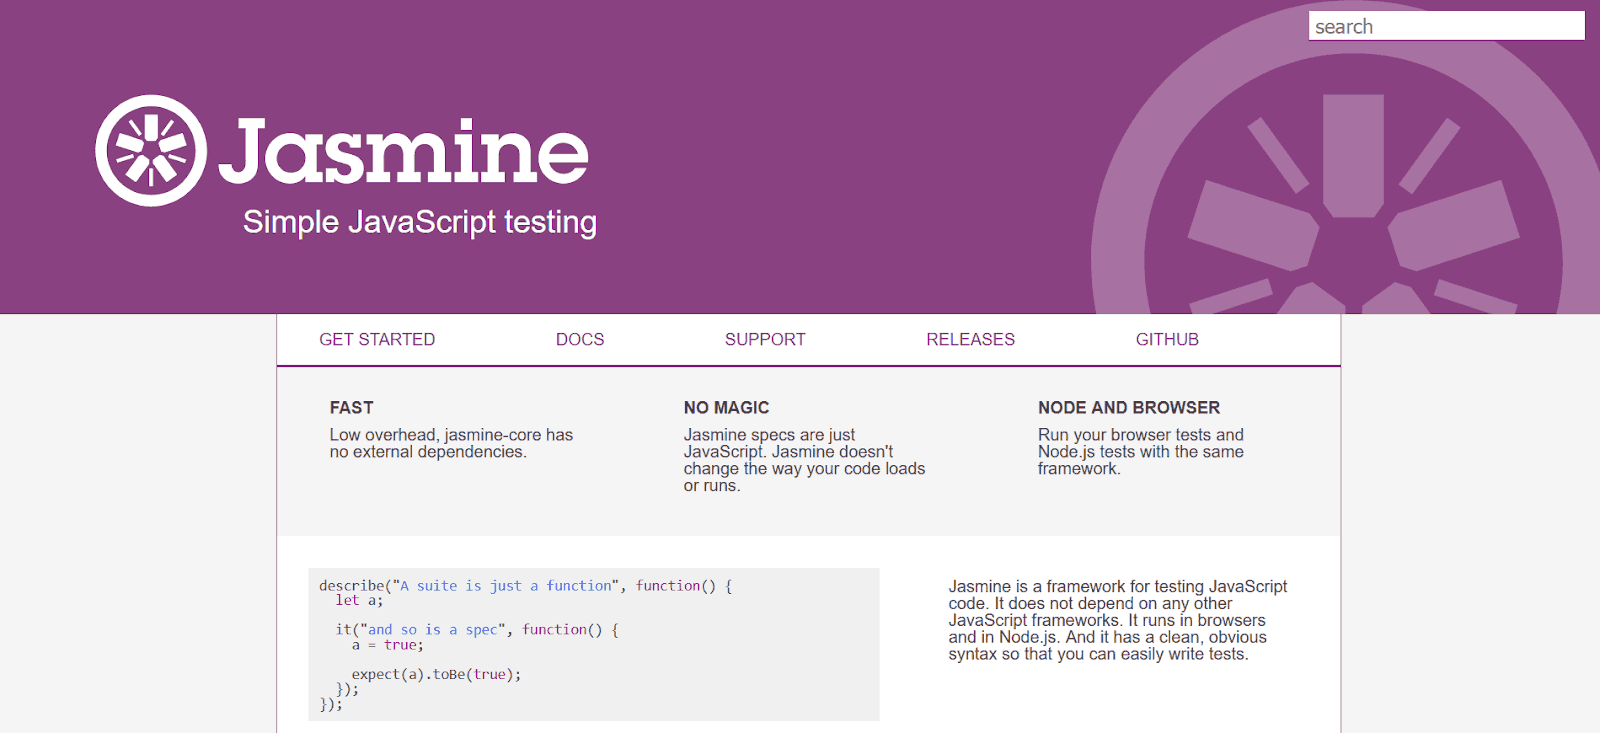 Jasmine is widely recognized as one of the top open-source testing tools